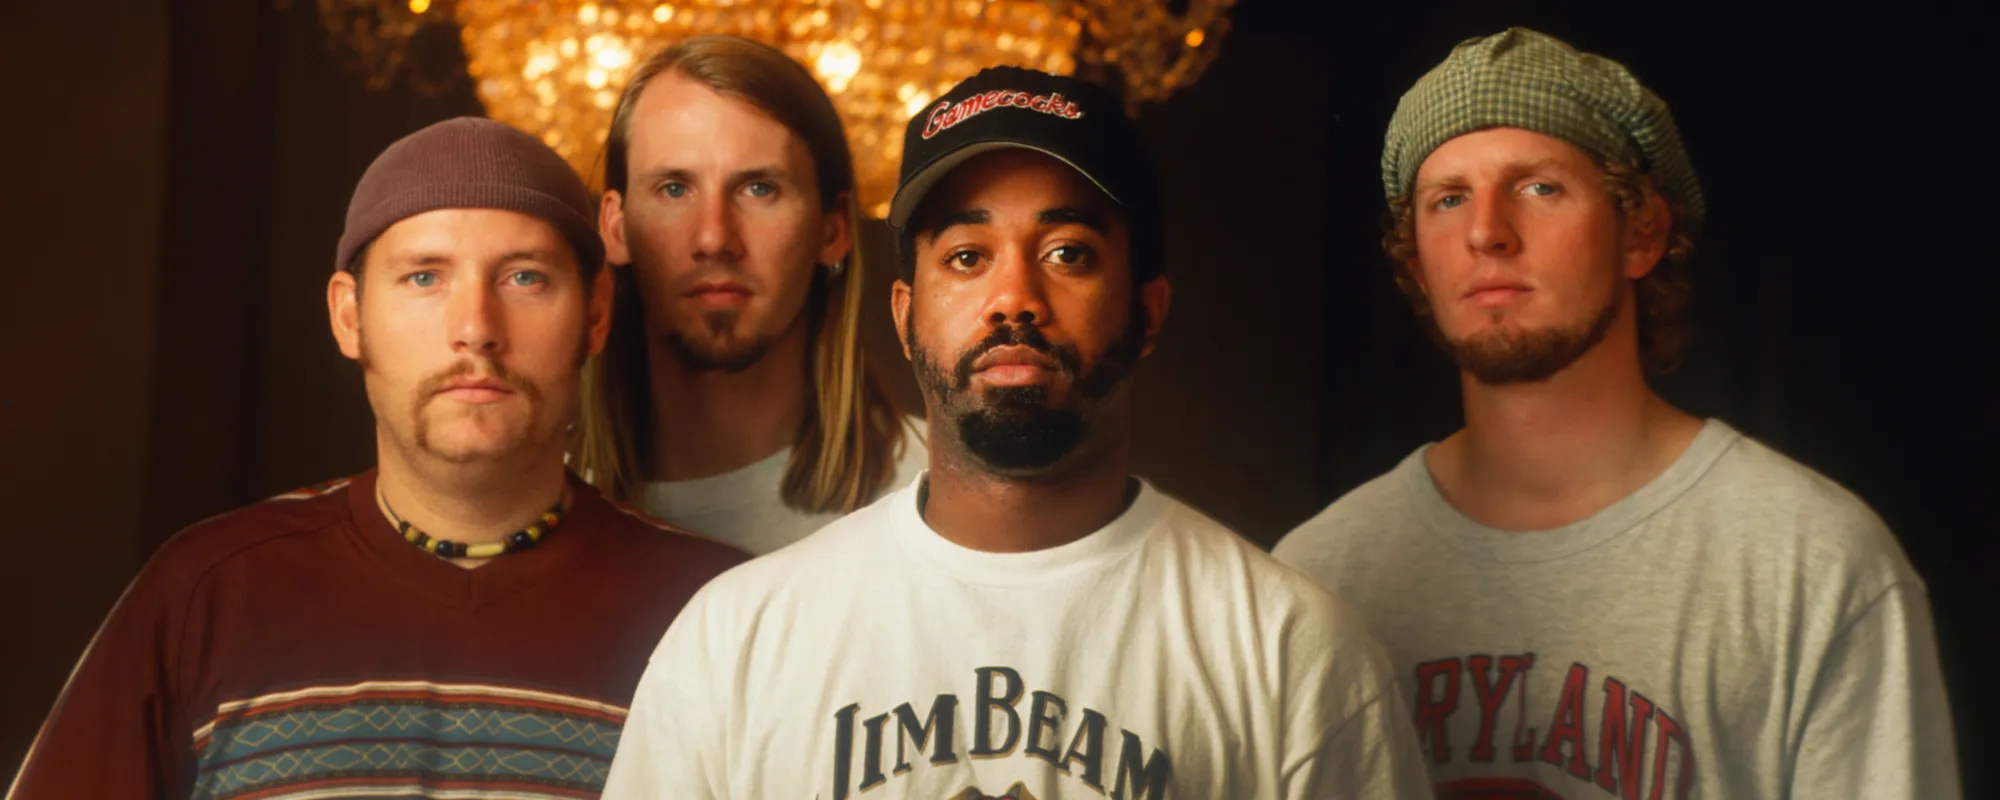 10 Essential Hootie & the Blowfish Songs To Do Everything and Nothing To